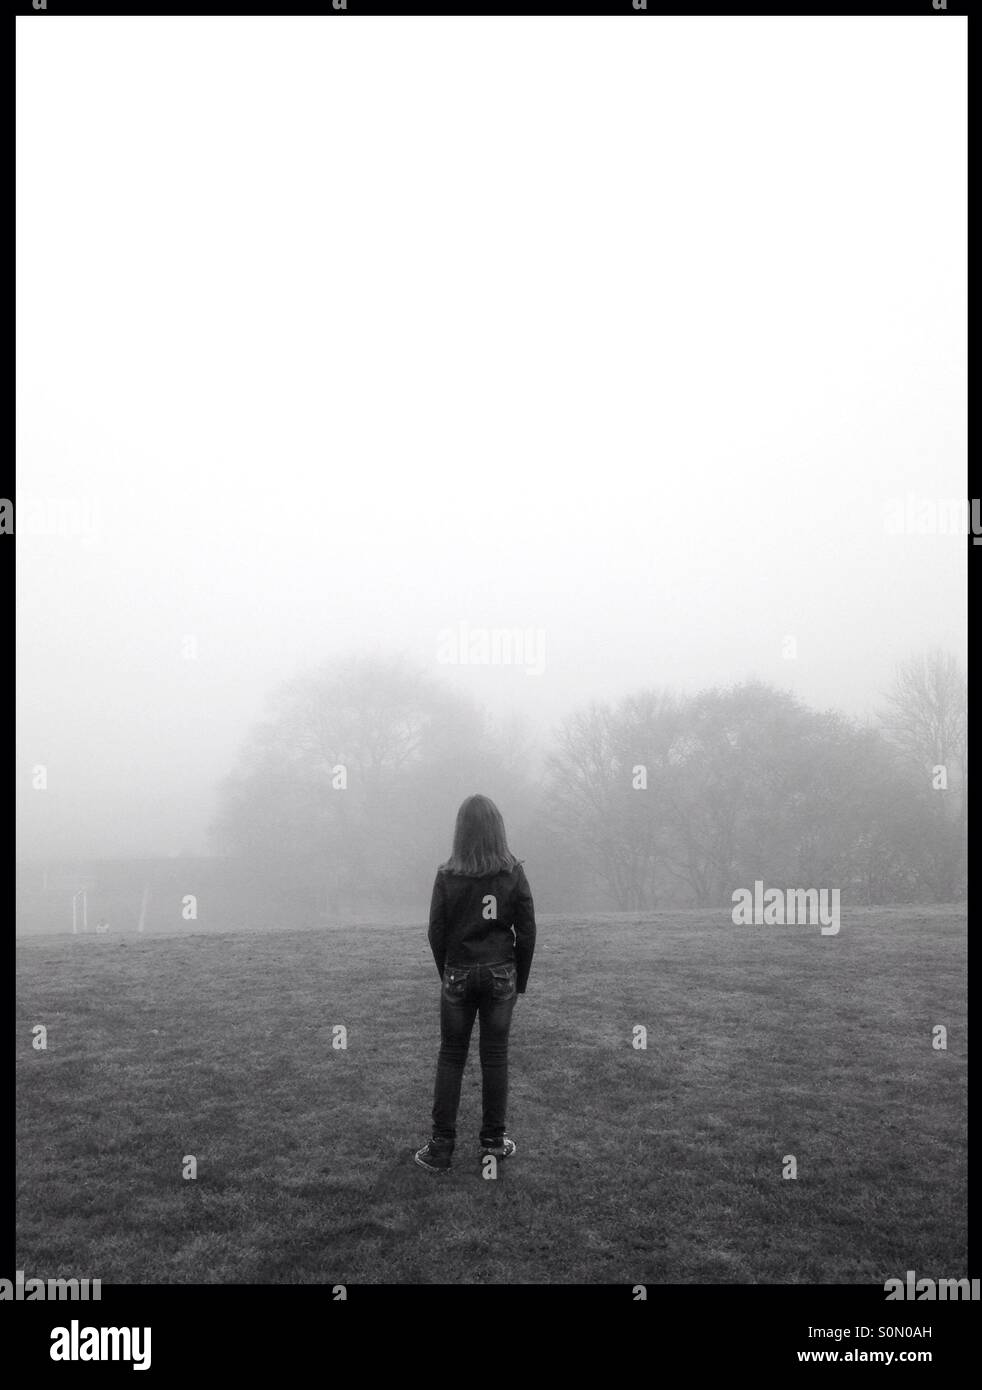 Child stood in field looking into the distance on a foggy day Stock Photo